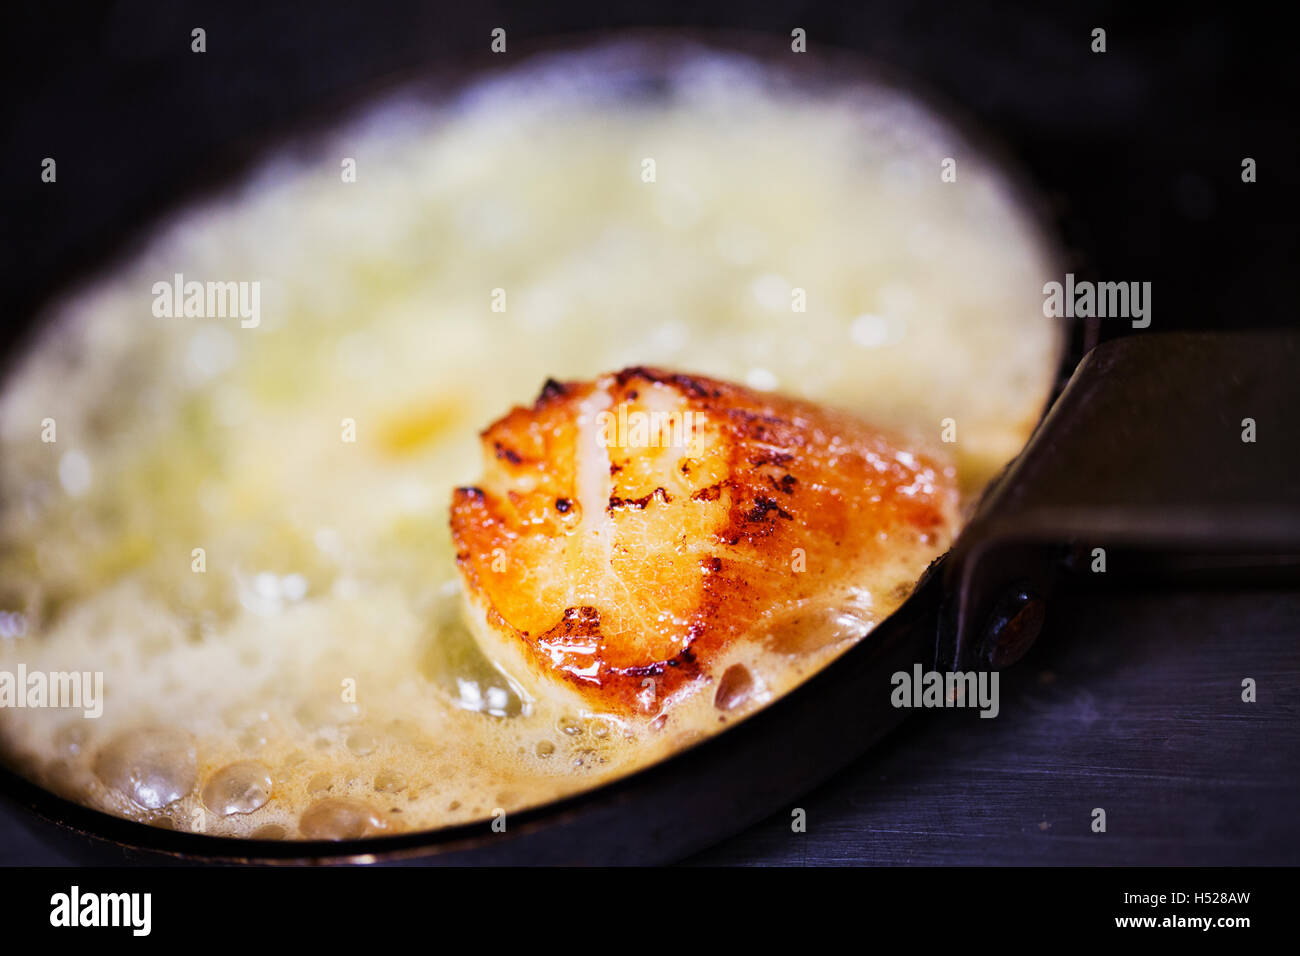 Close up of a scallop in a frying pan. Stock Photo